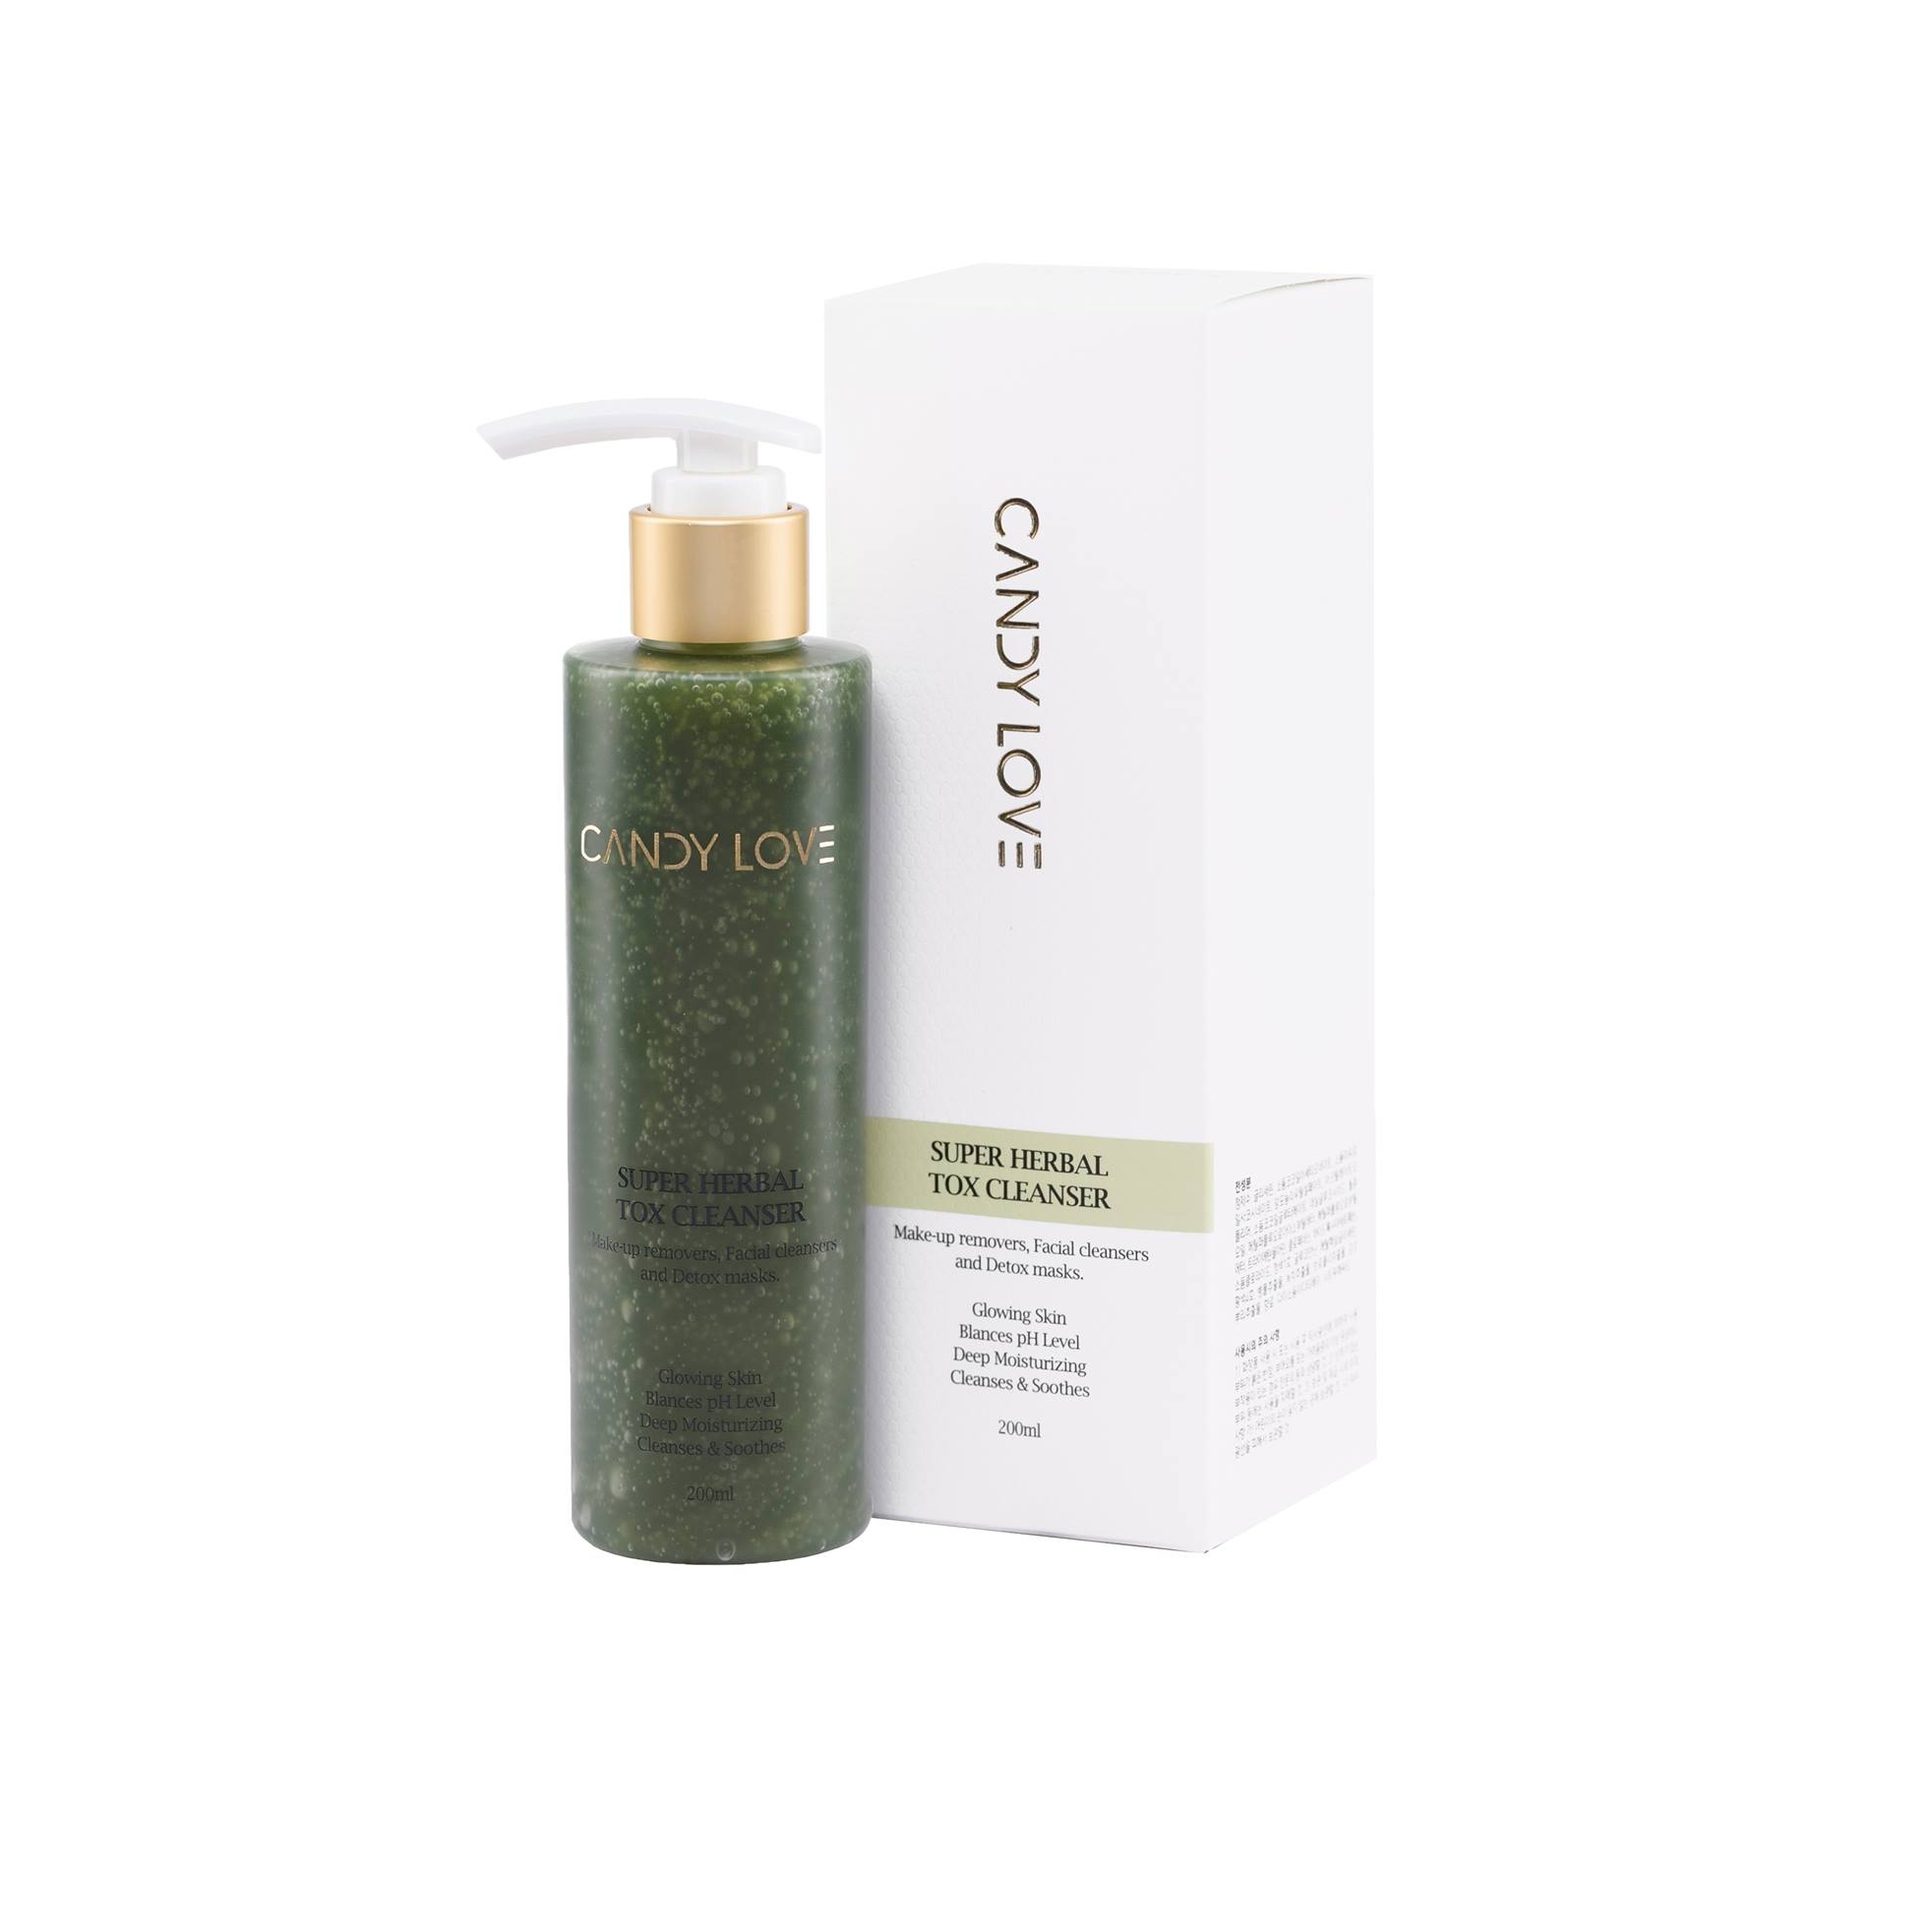 CL Super Herbal Tox Cleanser